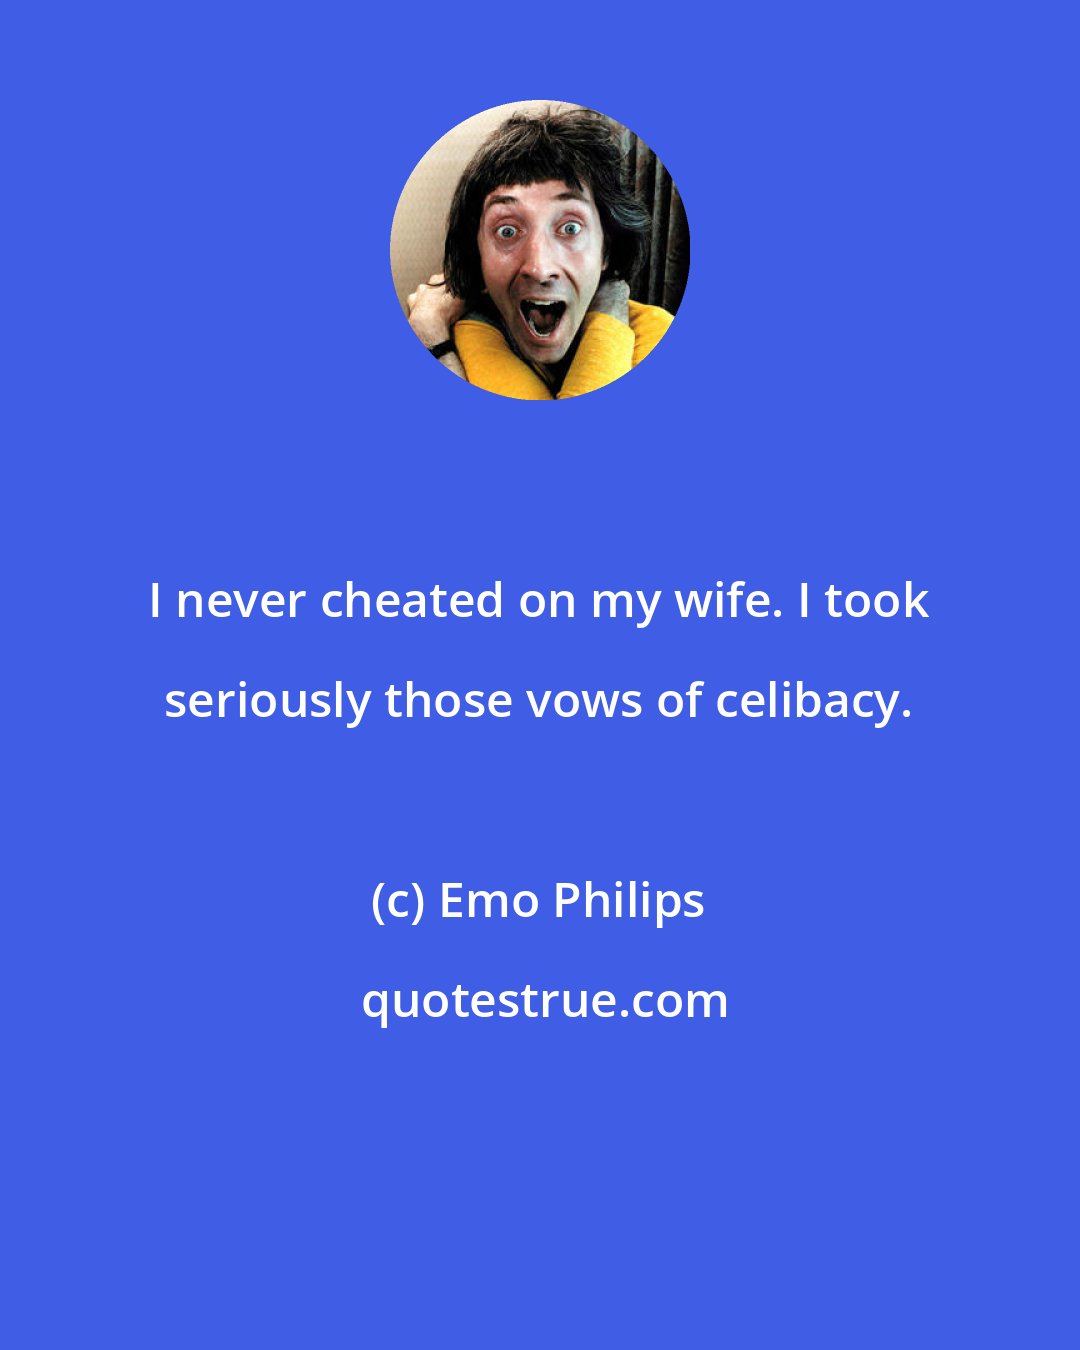 Emo Philips: I never cheated on my wife. I took seriously those vows of celibacy.